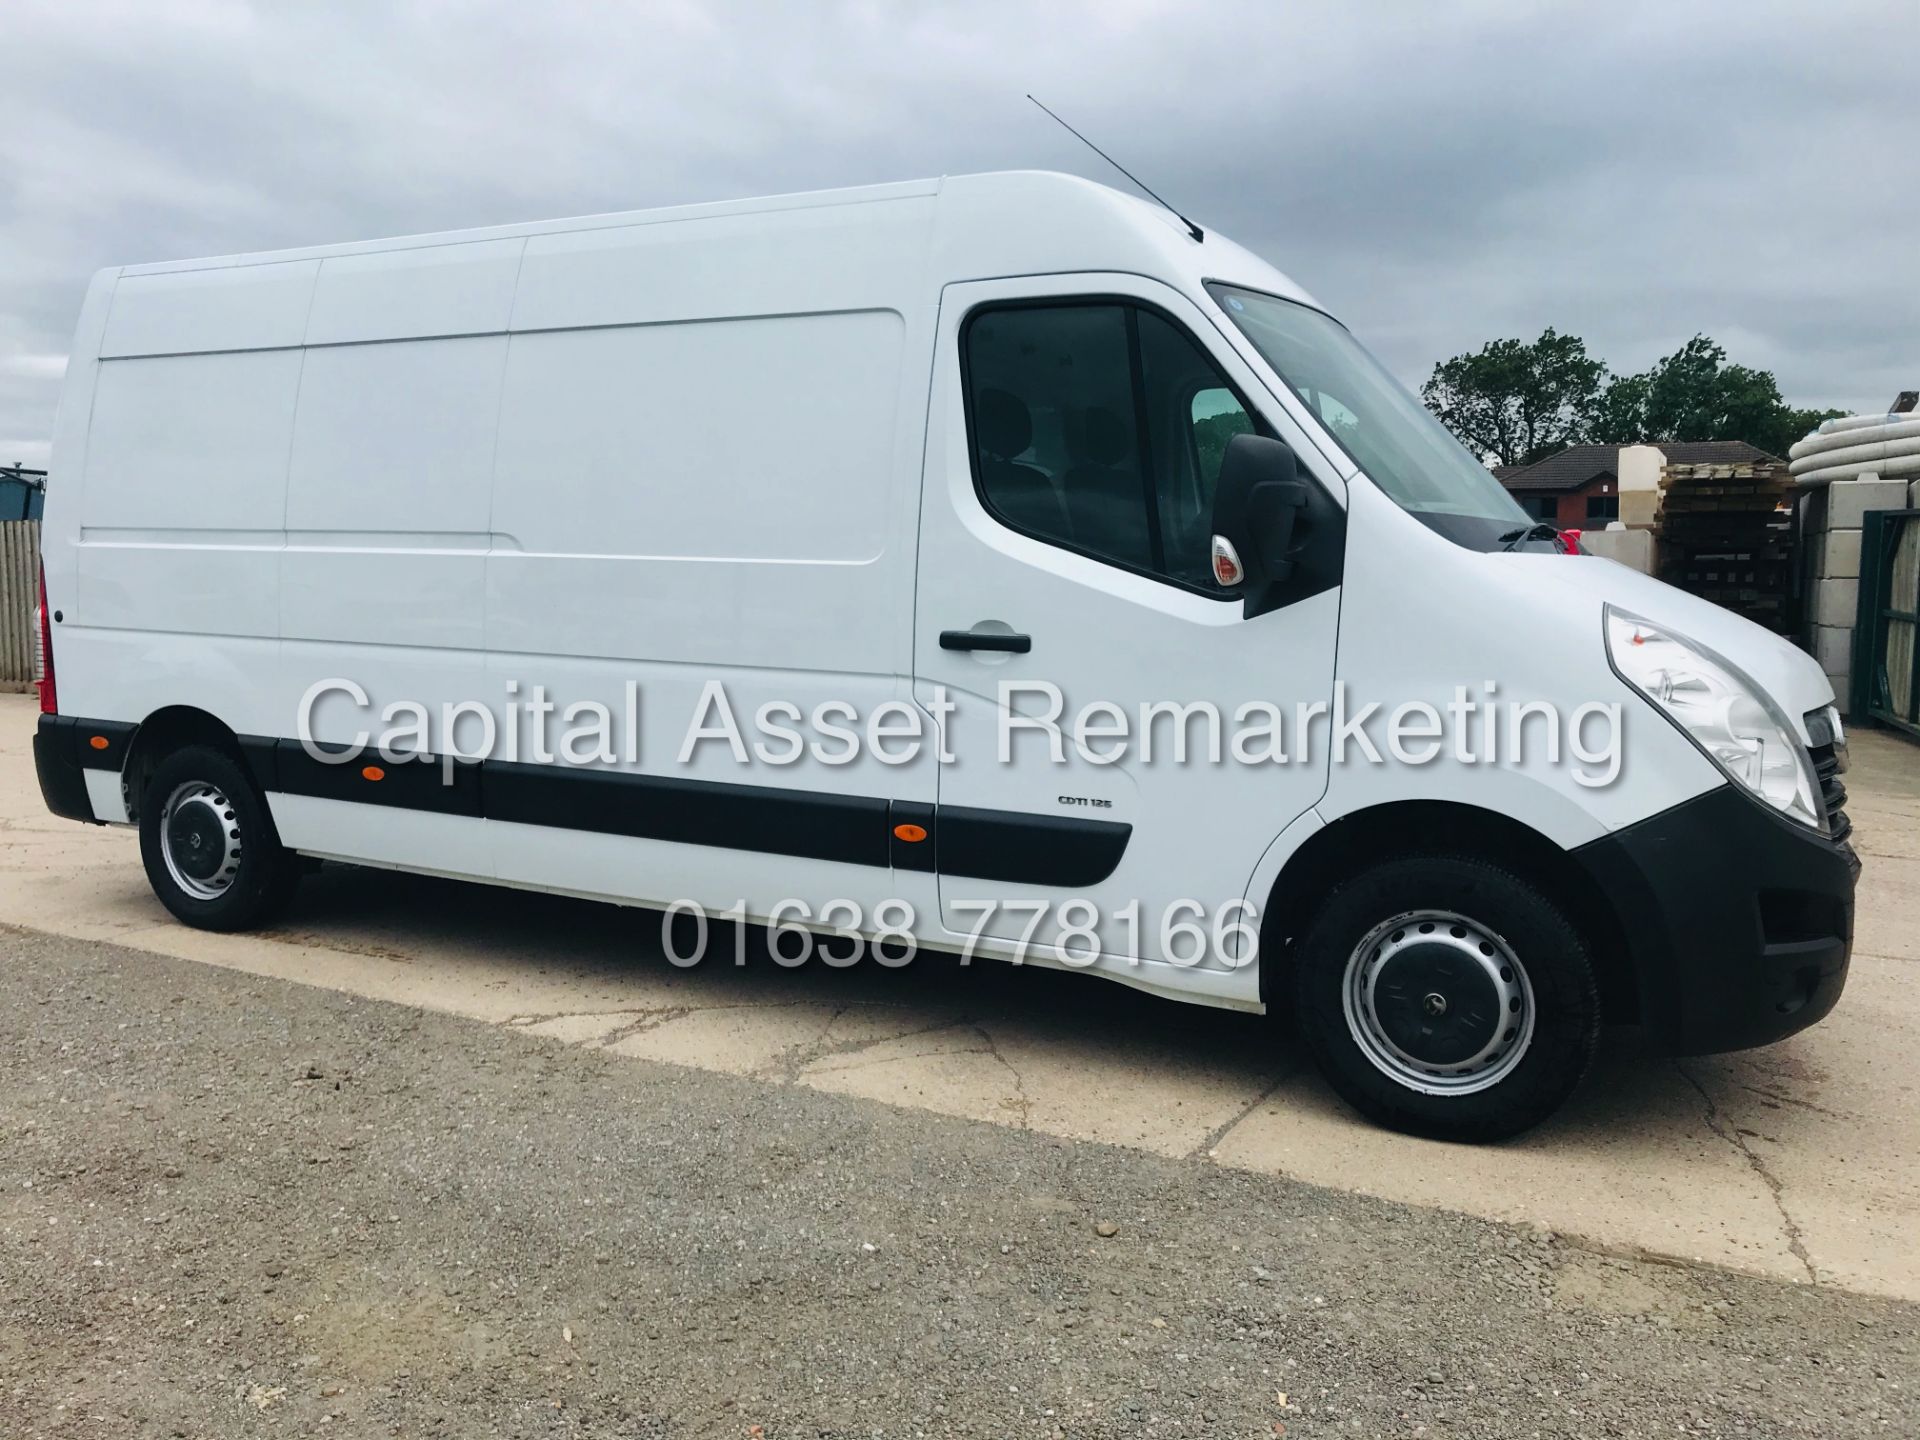 ON SALE VAUXHALL MOVANO 2.3CDTI "125BHP" LWB VAN WITH PALFINGER ELECTRIC TAIL LIFT-LOW MILES 64 REG - Image 2 of 24